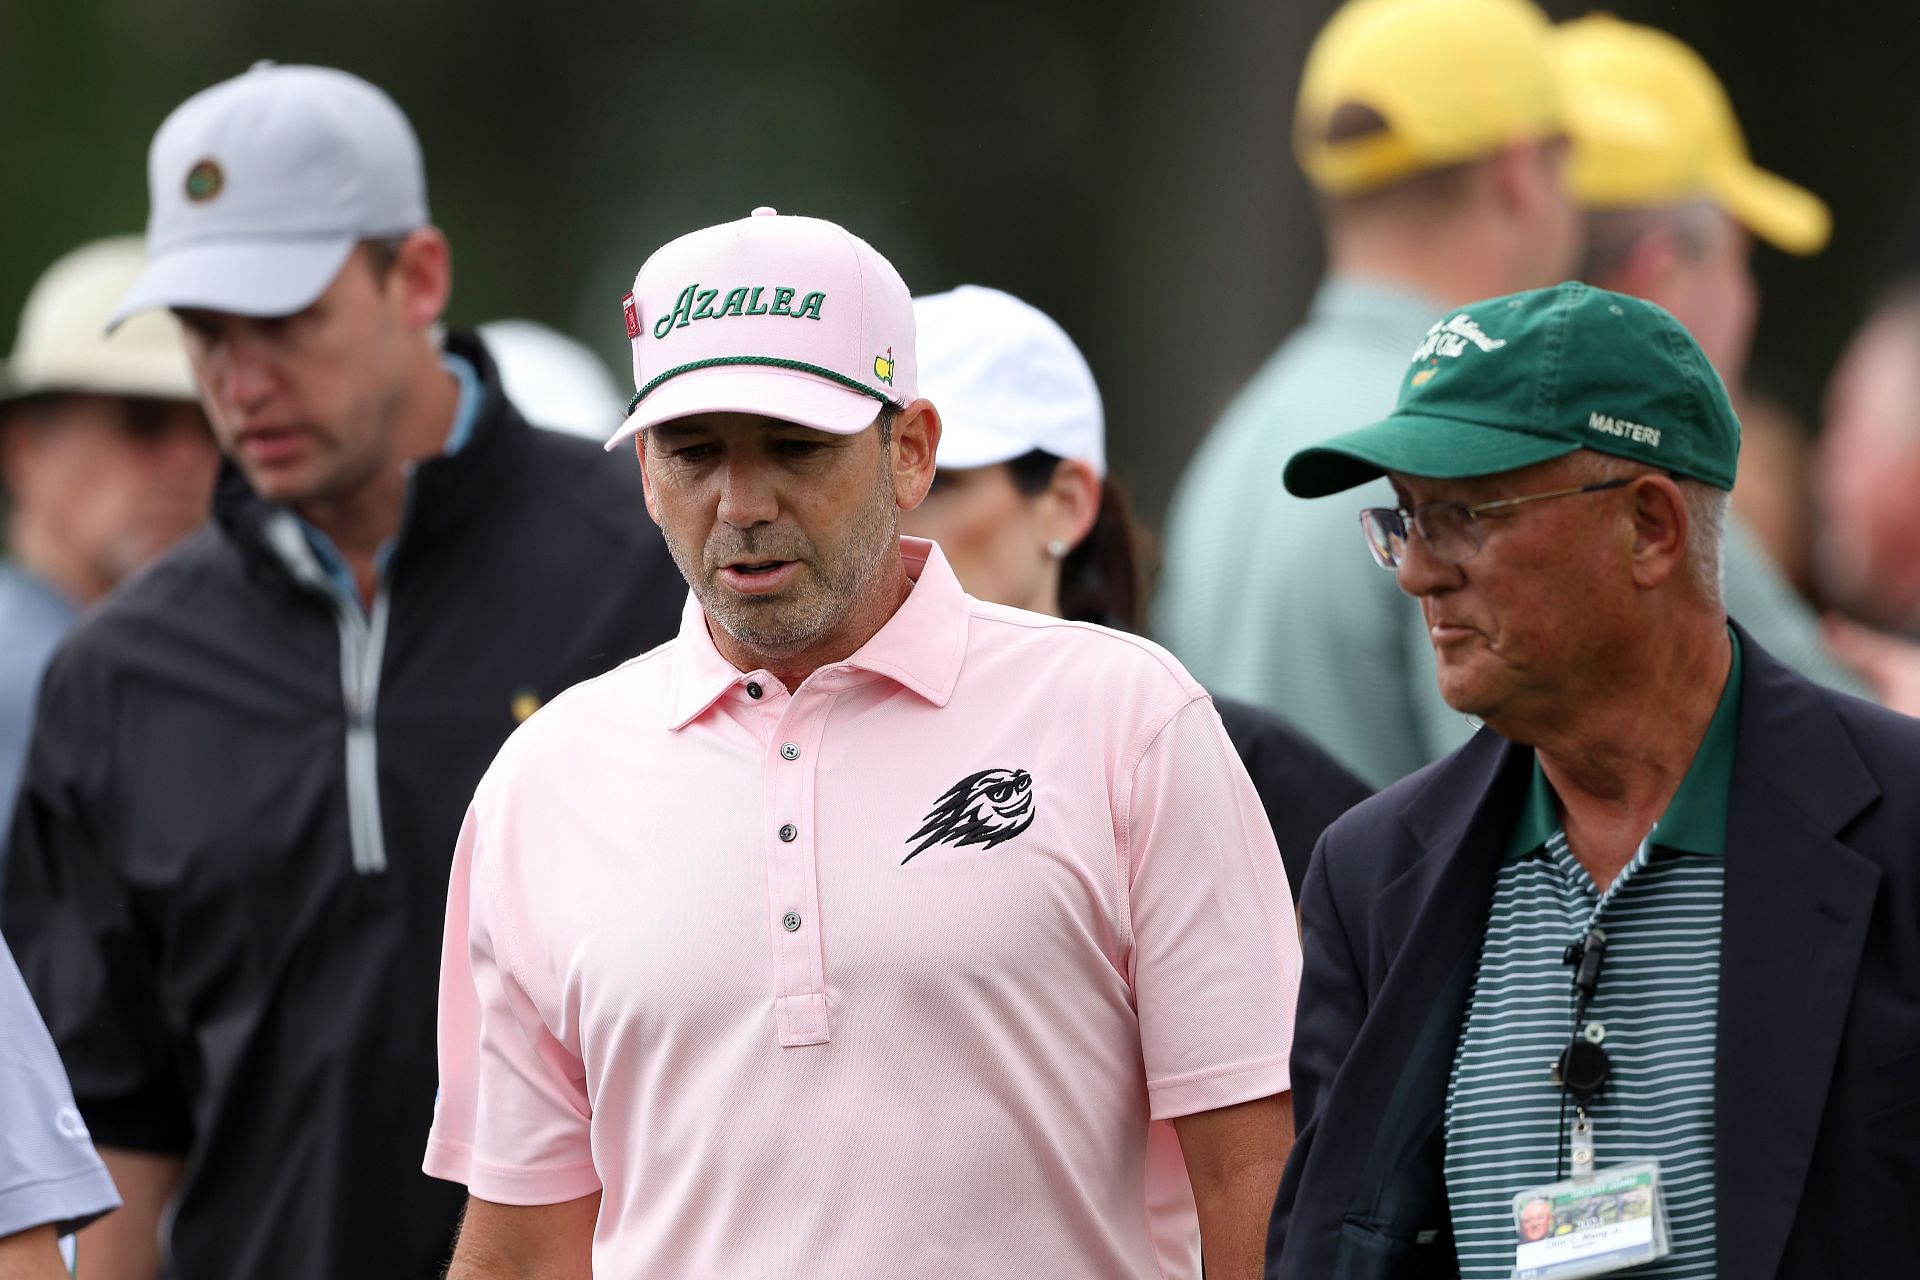 A disappointing outing for Sergio Garcia at Augusta National